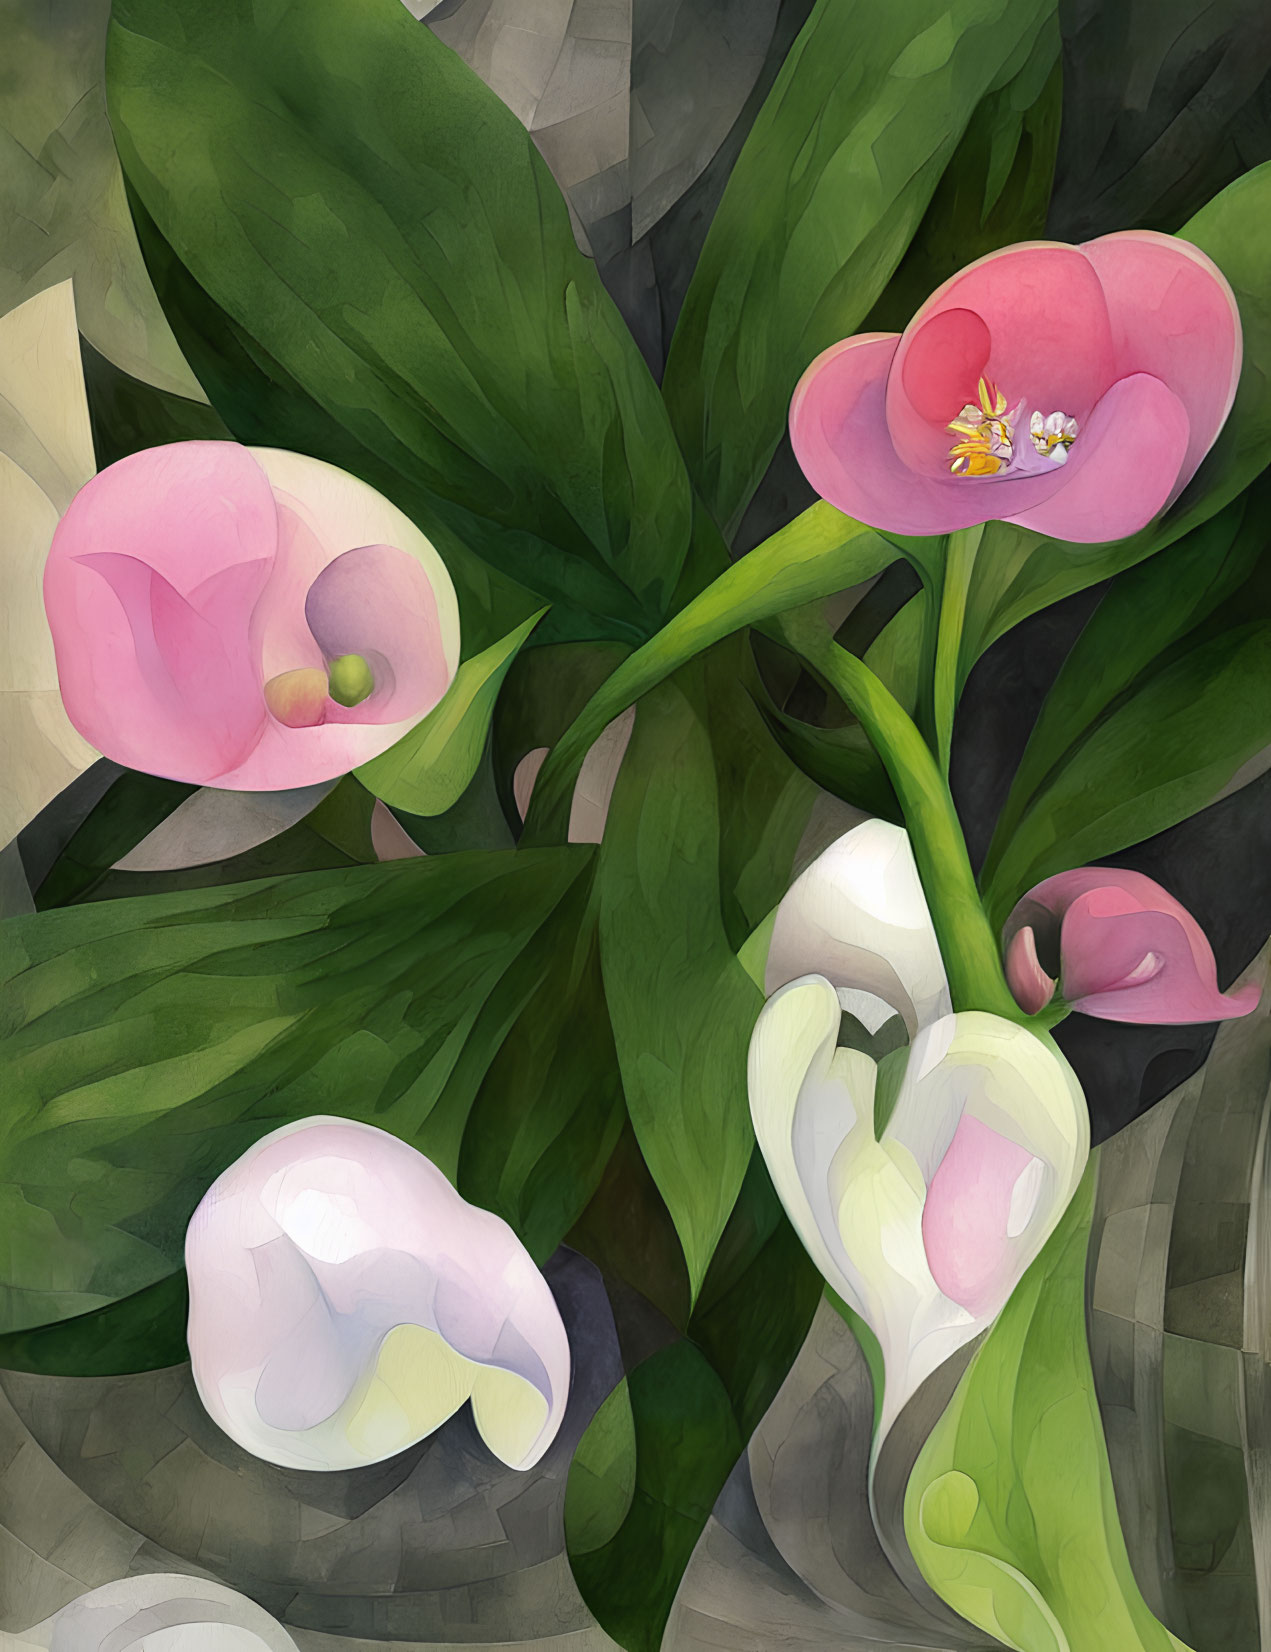 Pink and White Calla Lilies Illustration on Textured Grey Background